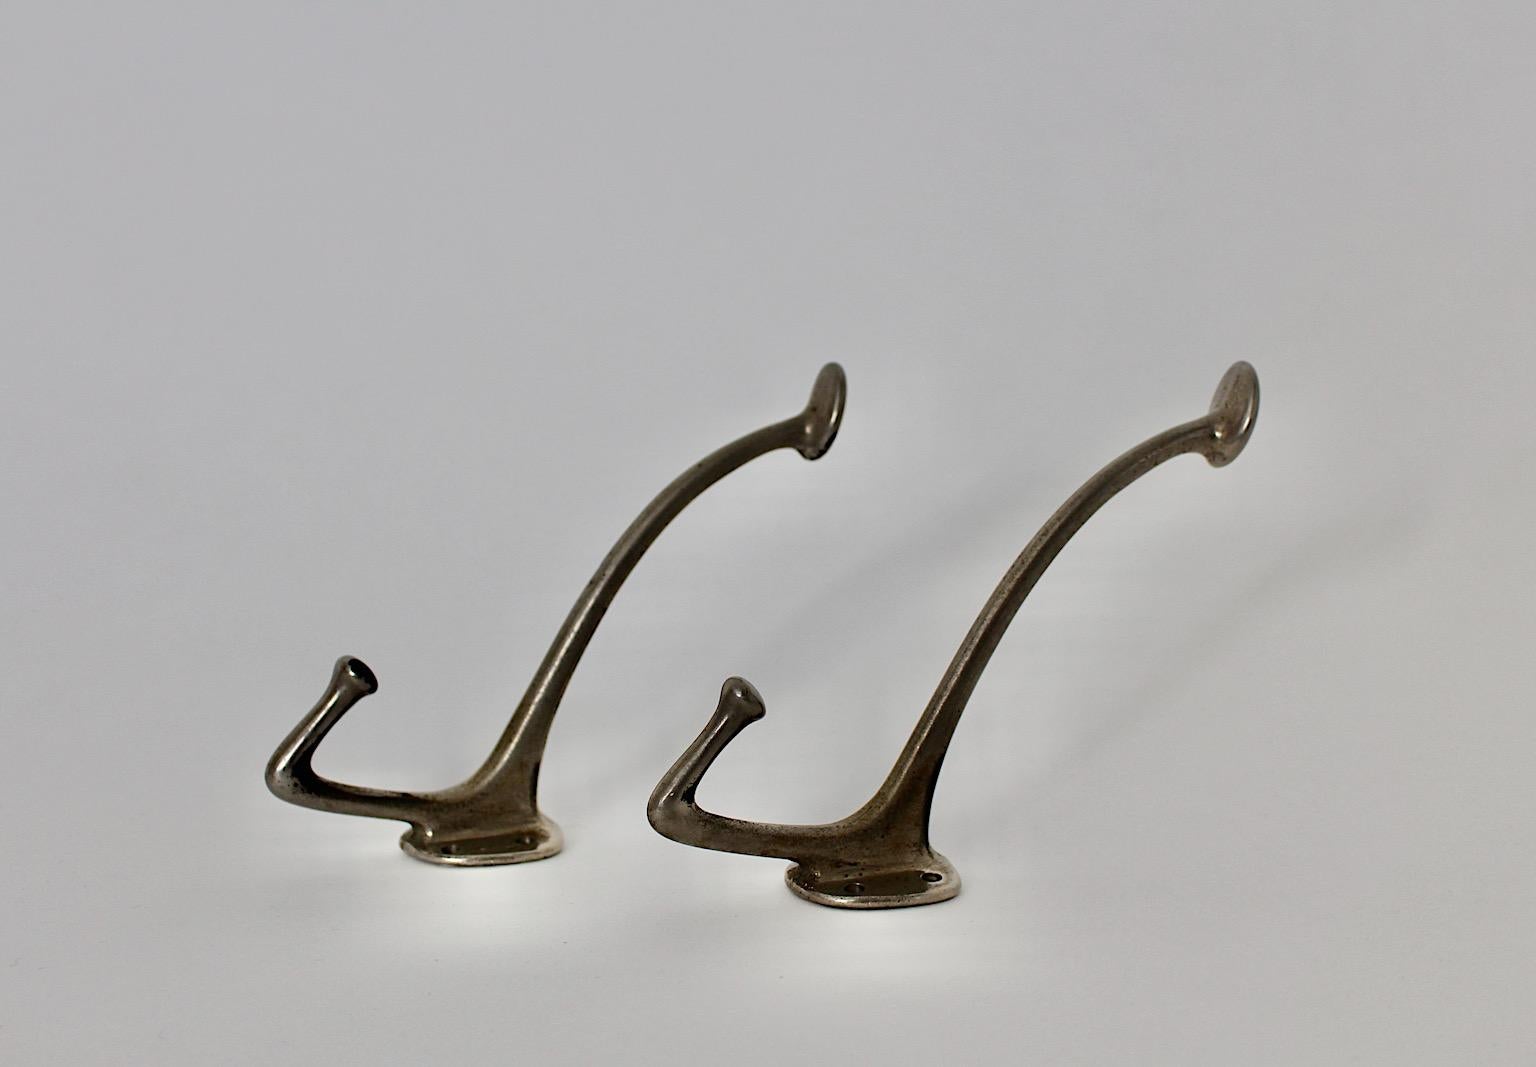 Jugendstil vintage pair of wall hooks or coat hooks by Adolf Loos from nickel plated metal circa 1916 Vienna.
A wonderful pair of coat hooks from nickel plated metal by Adolf Loos circa 1916, Vienna.
The coat hooks are easy to fix. 
These coat